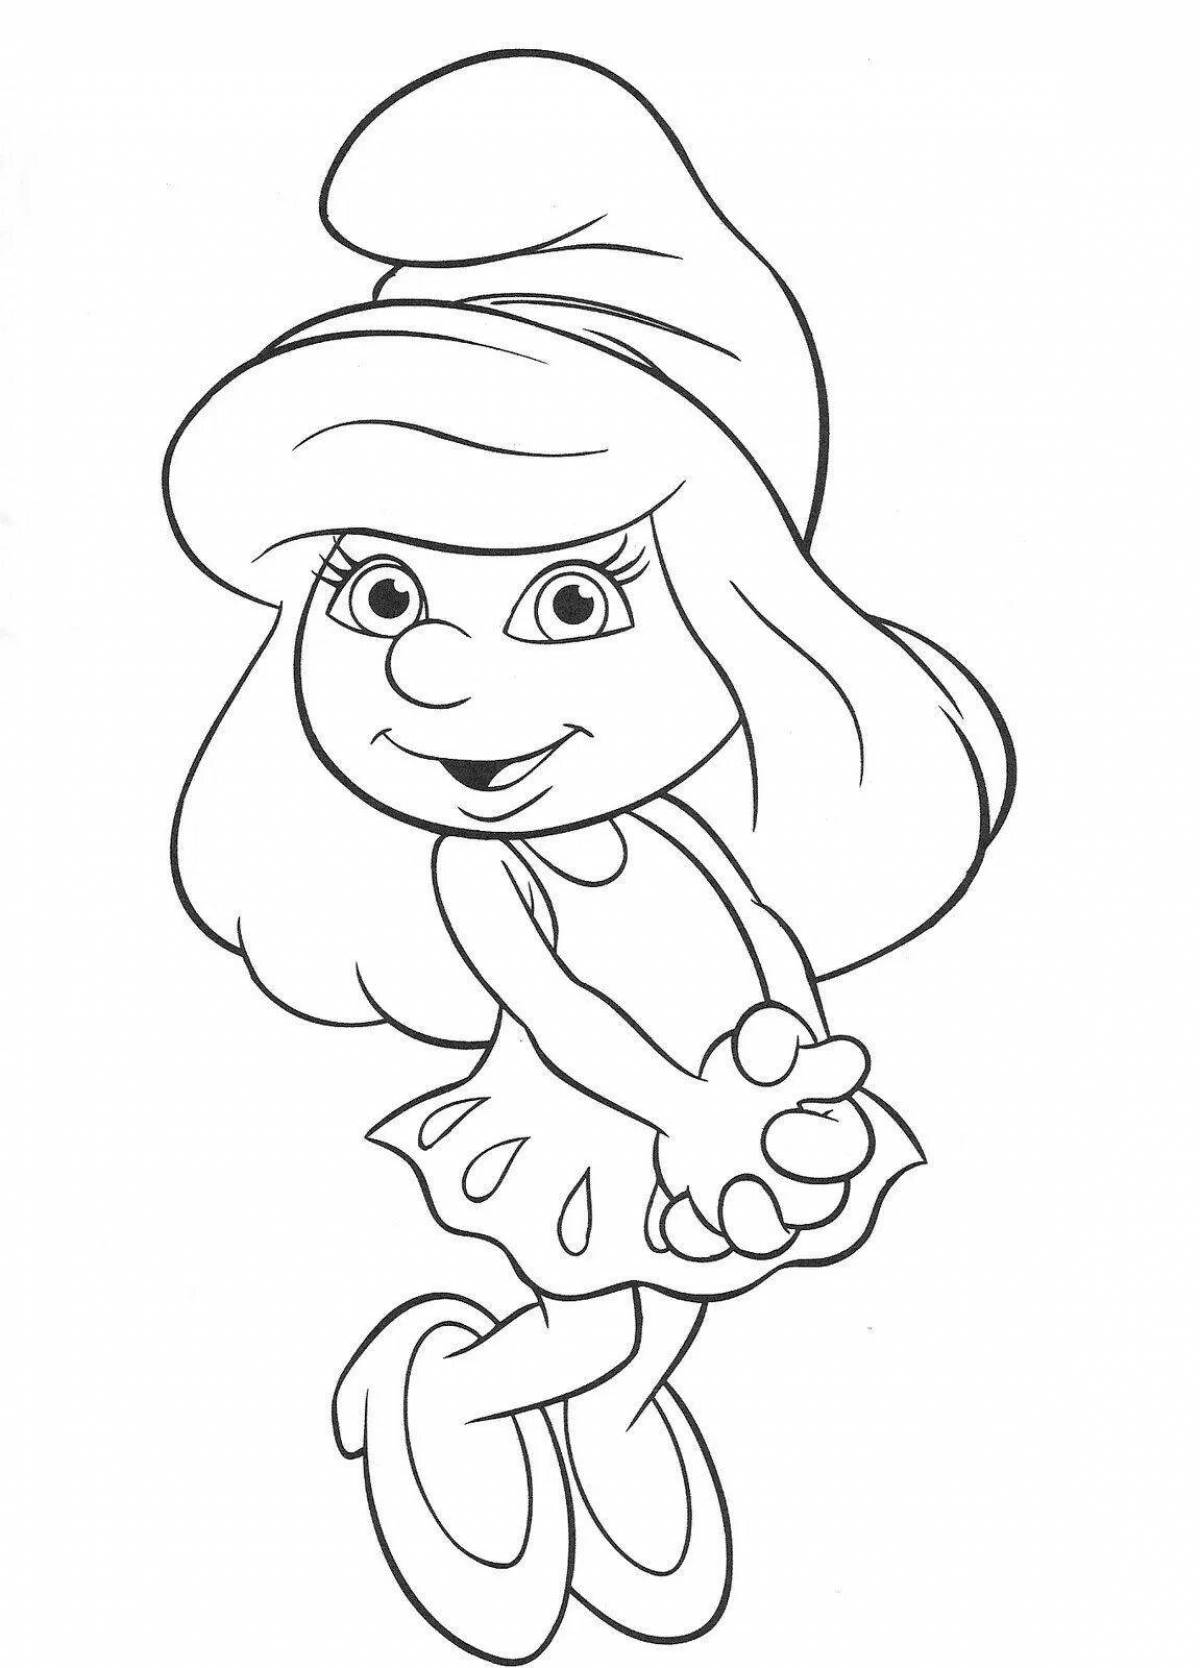 Charming smurfette coloring book